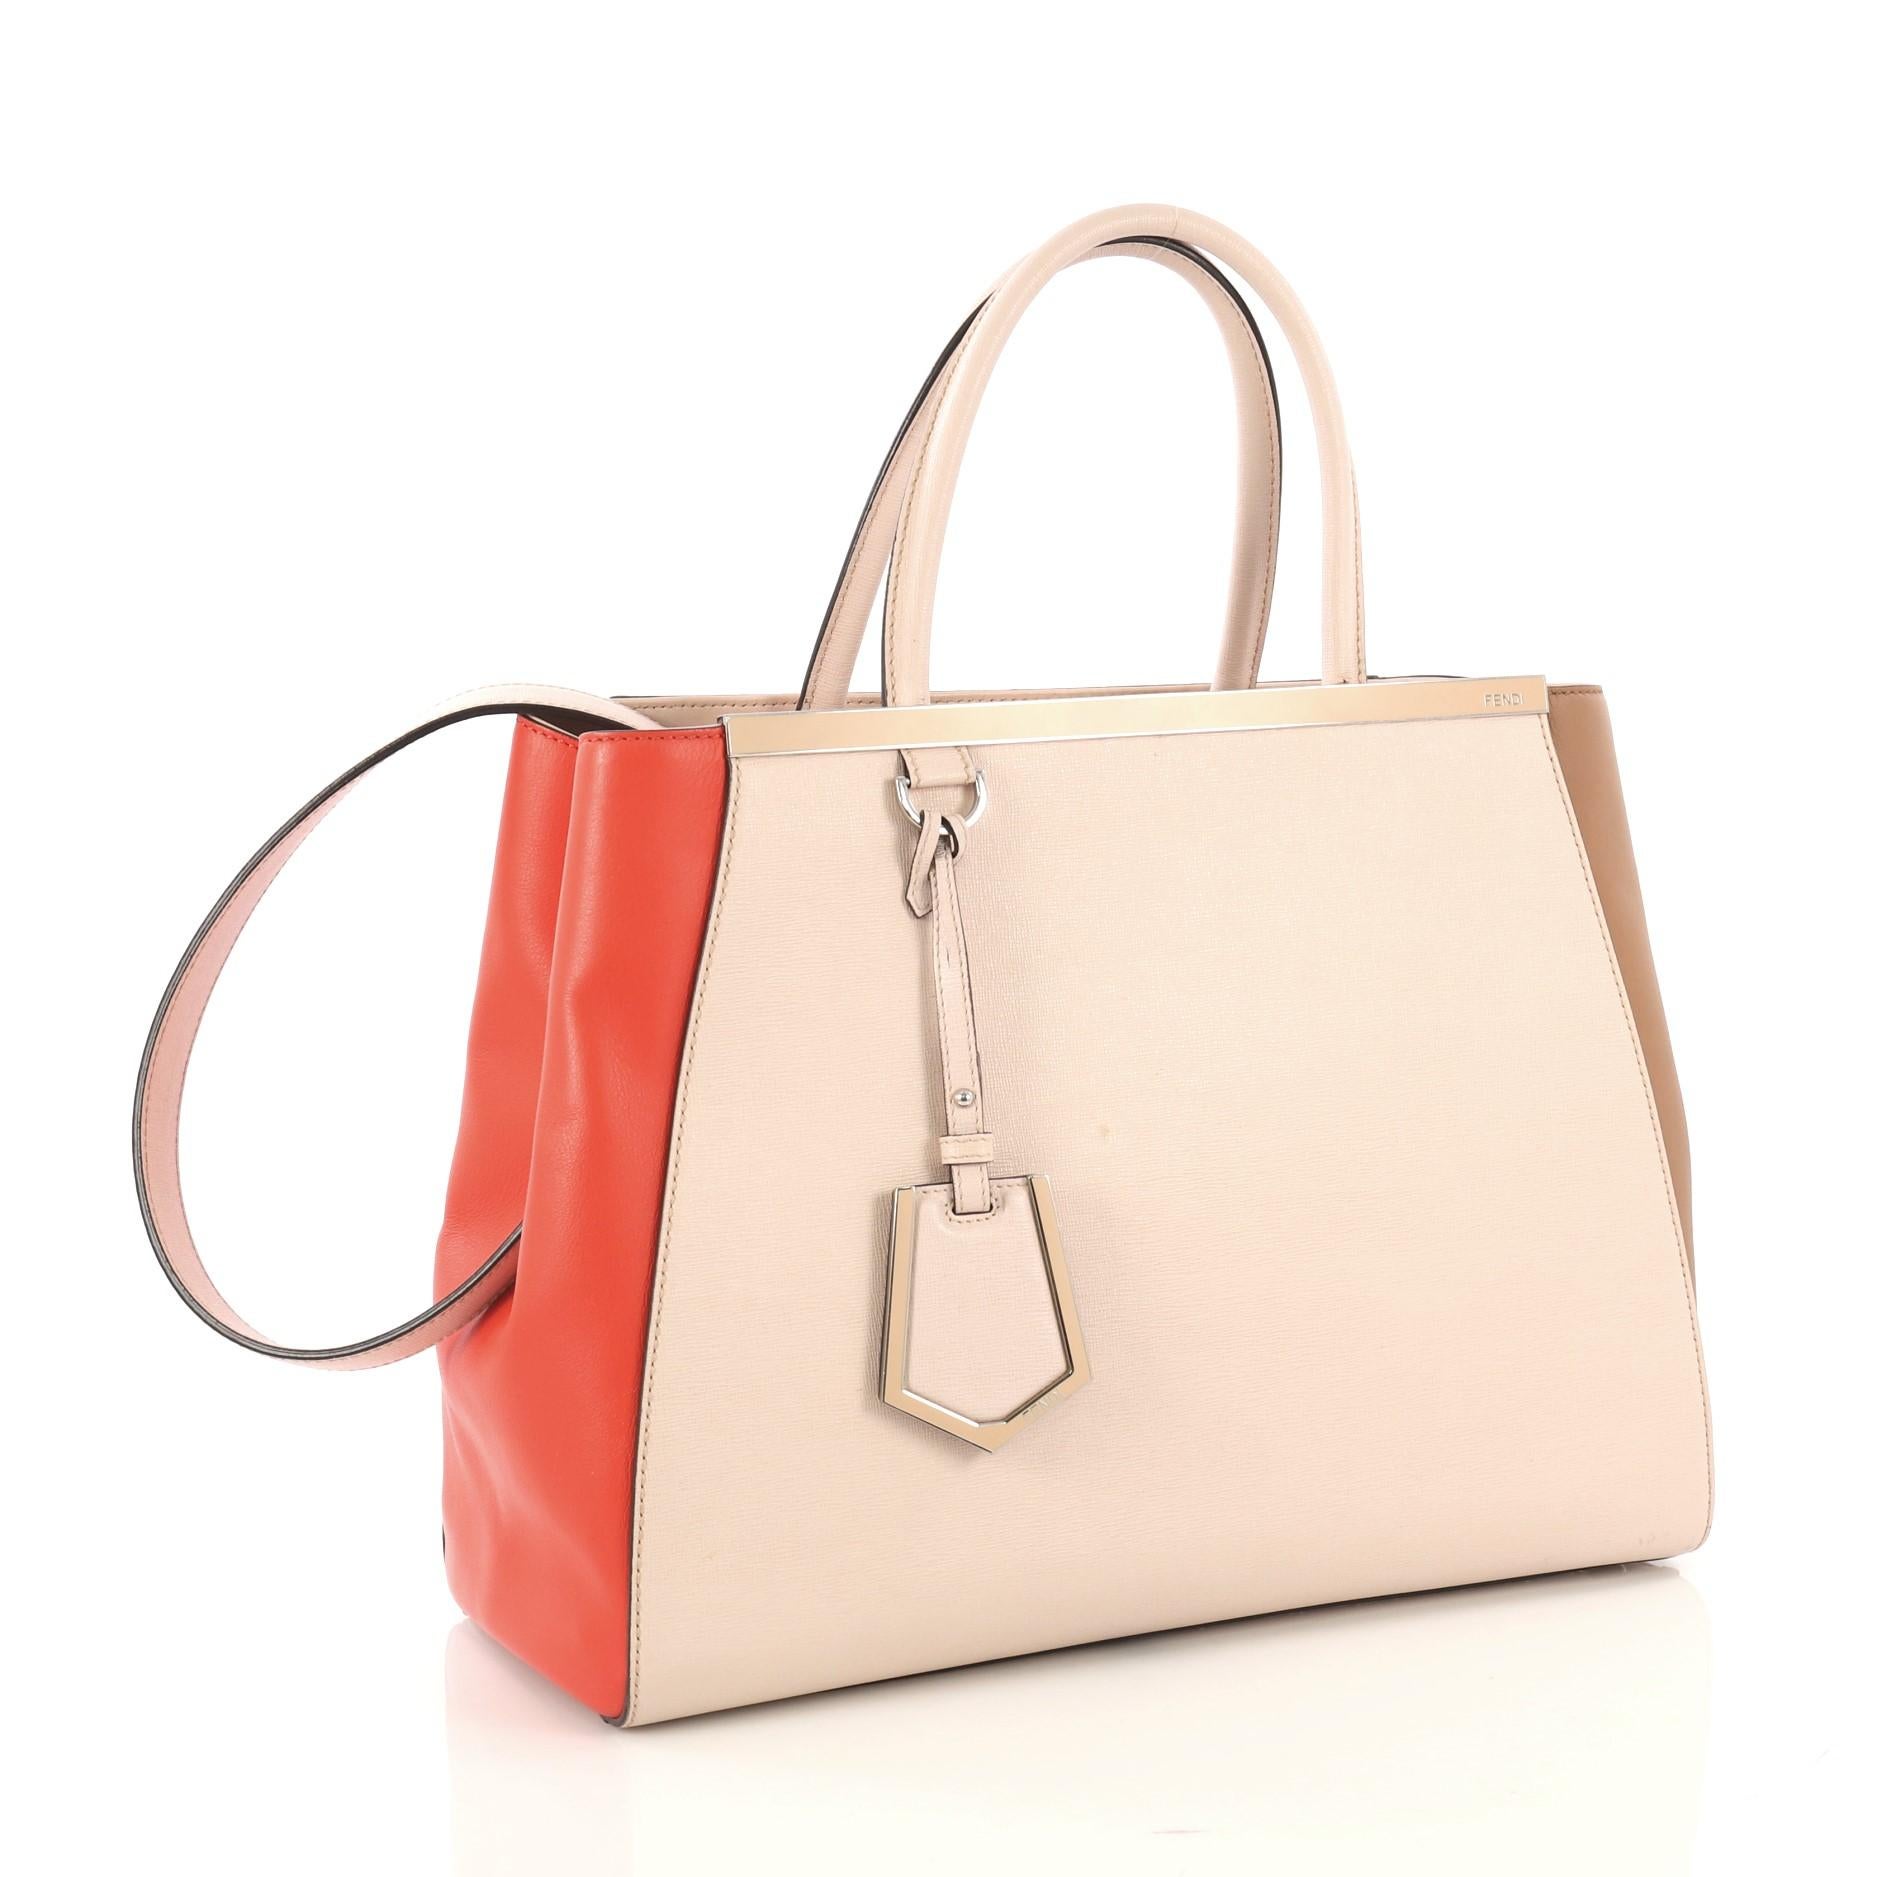 This Fendi Multicolor 2Jours Bag Leather Medium, crafted from red, pink and brown leather, features dual rolled leather handles, top bar with Fendi brand name, protective base studs, and silver-tone hardware. Its magnetic snap tab closure opens to a